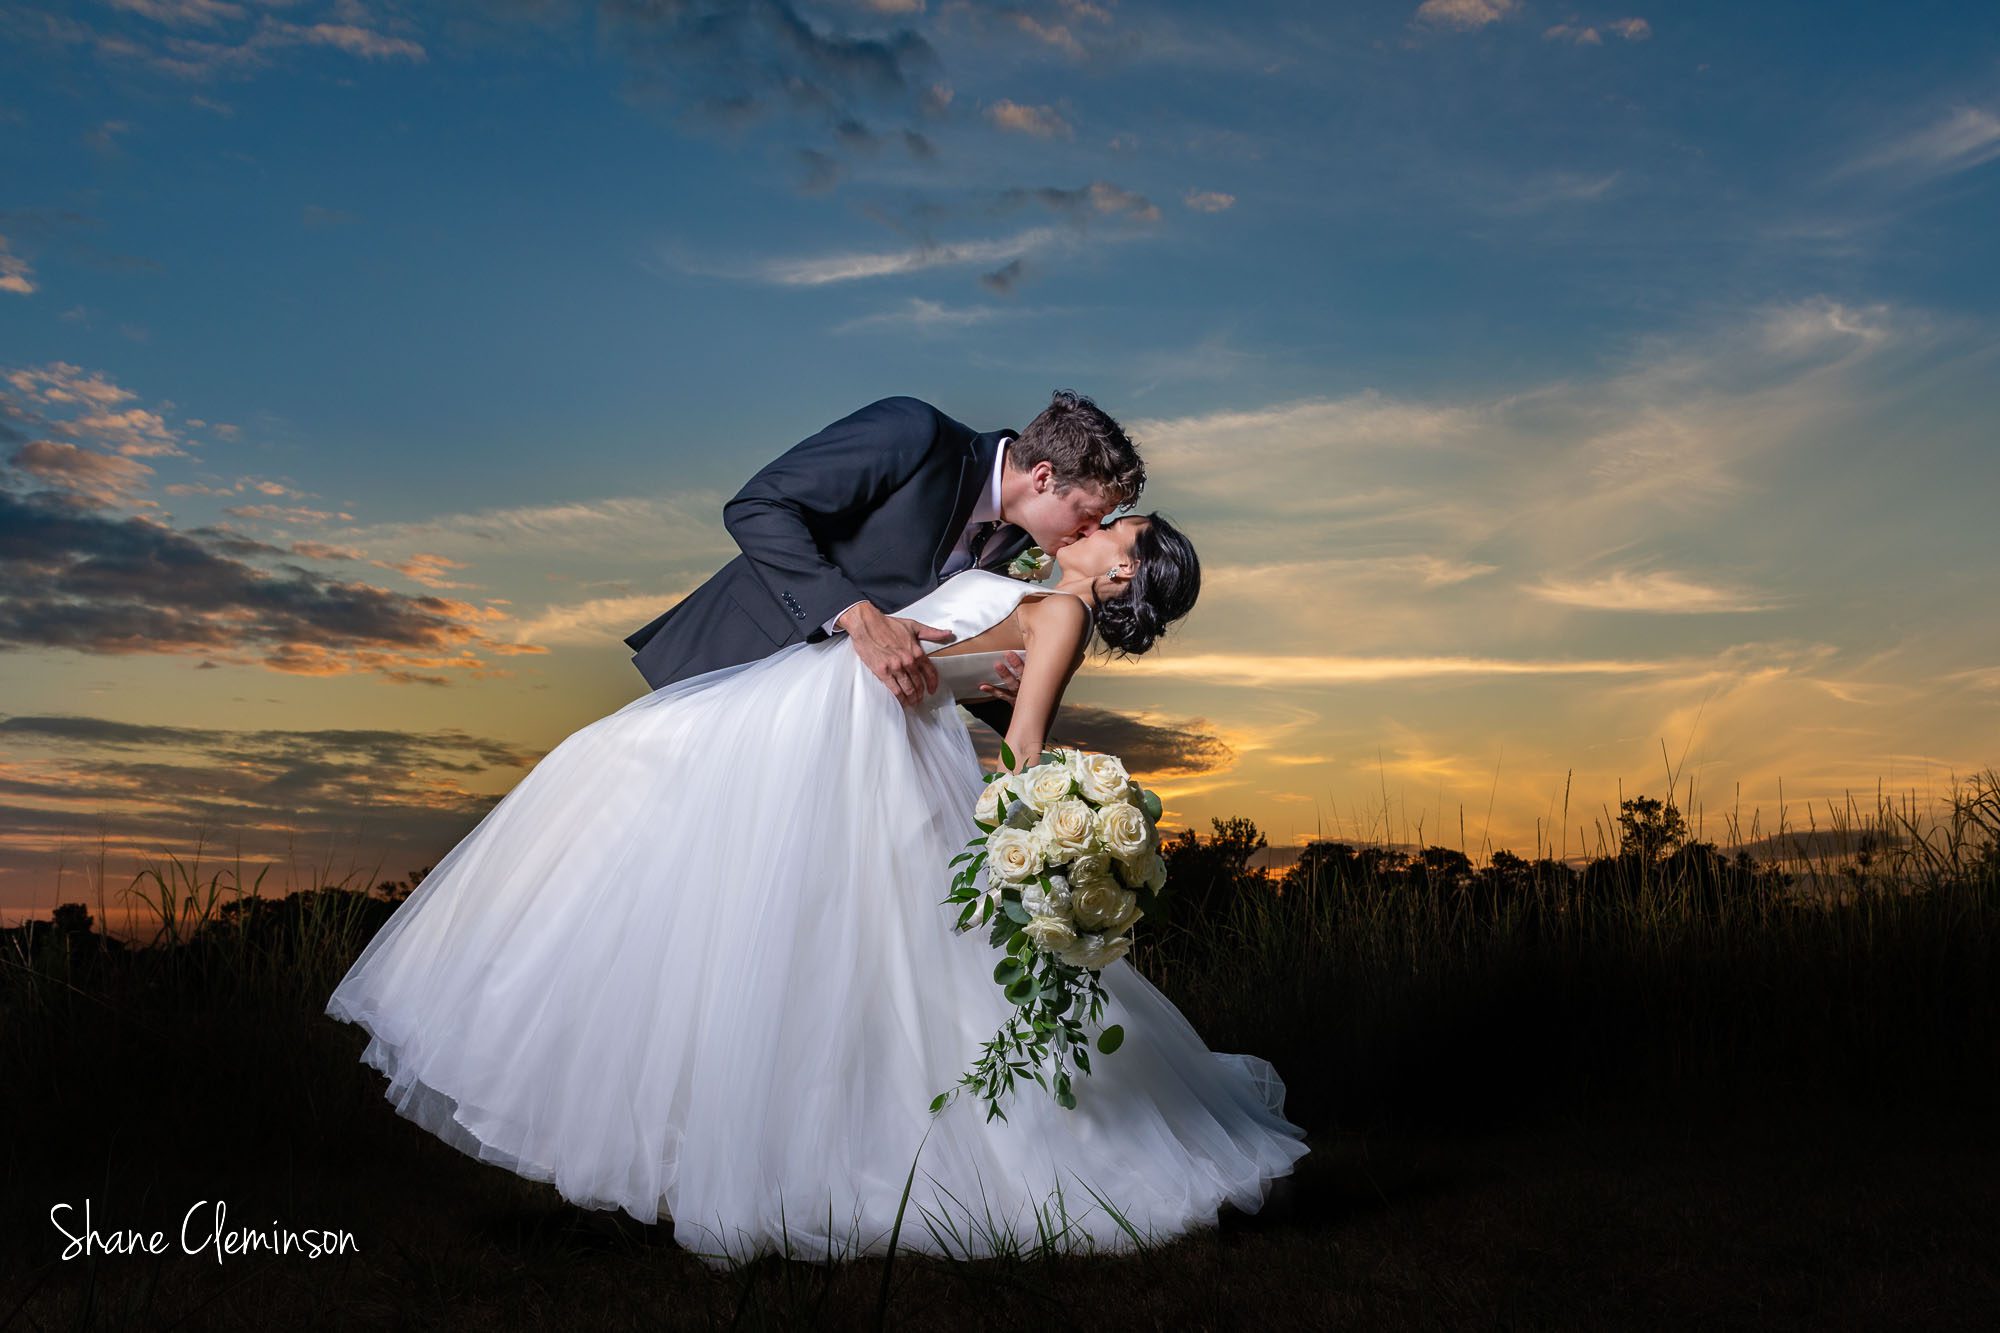 Chicago Wedding Photographer. Bride and Groom at Sunset